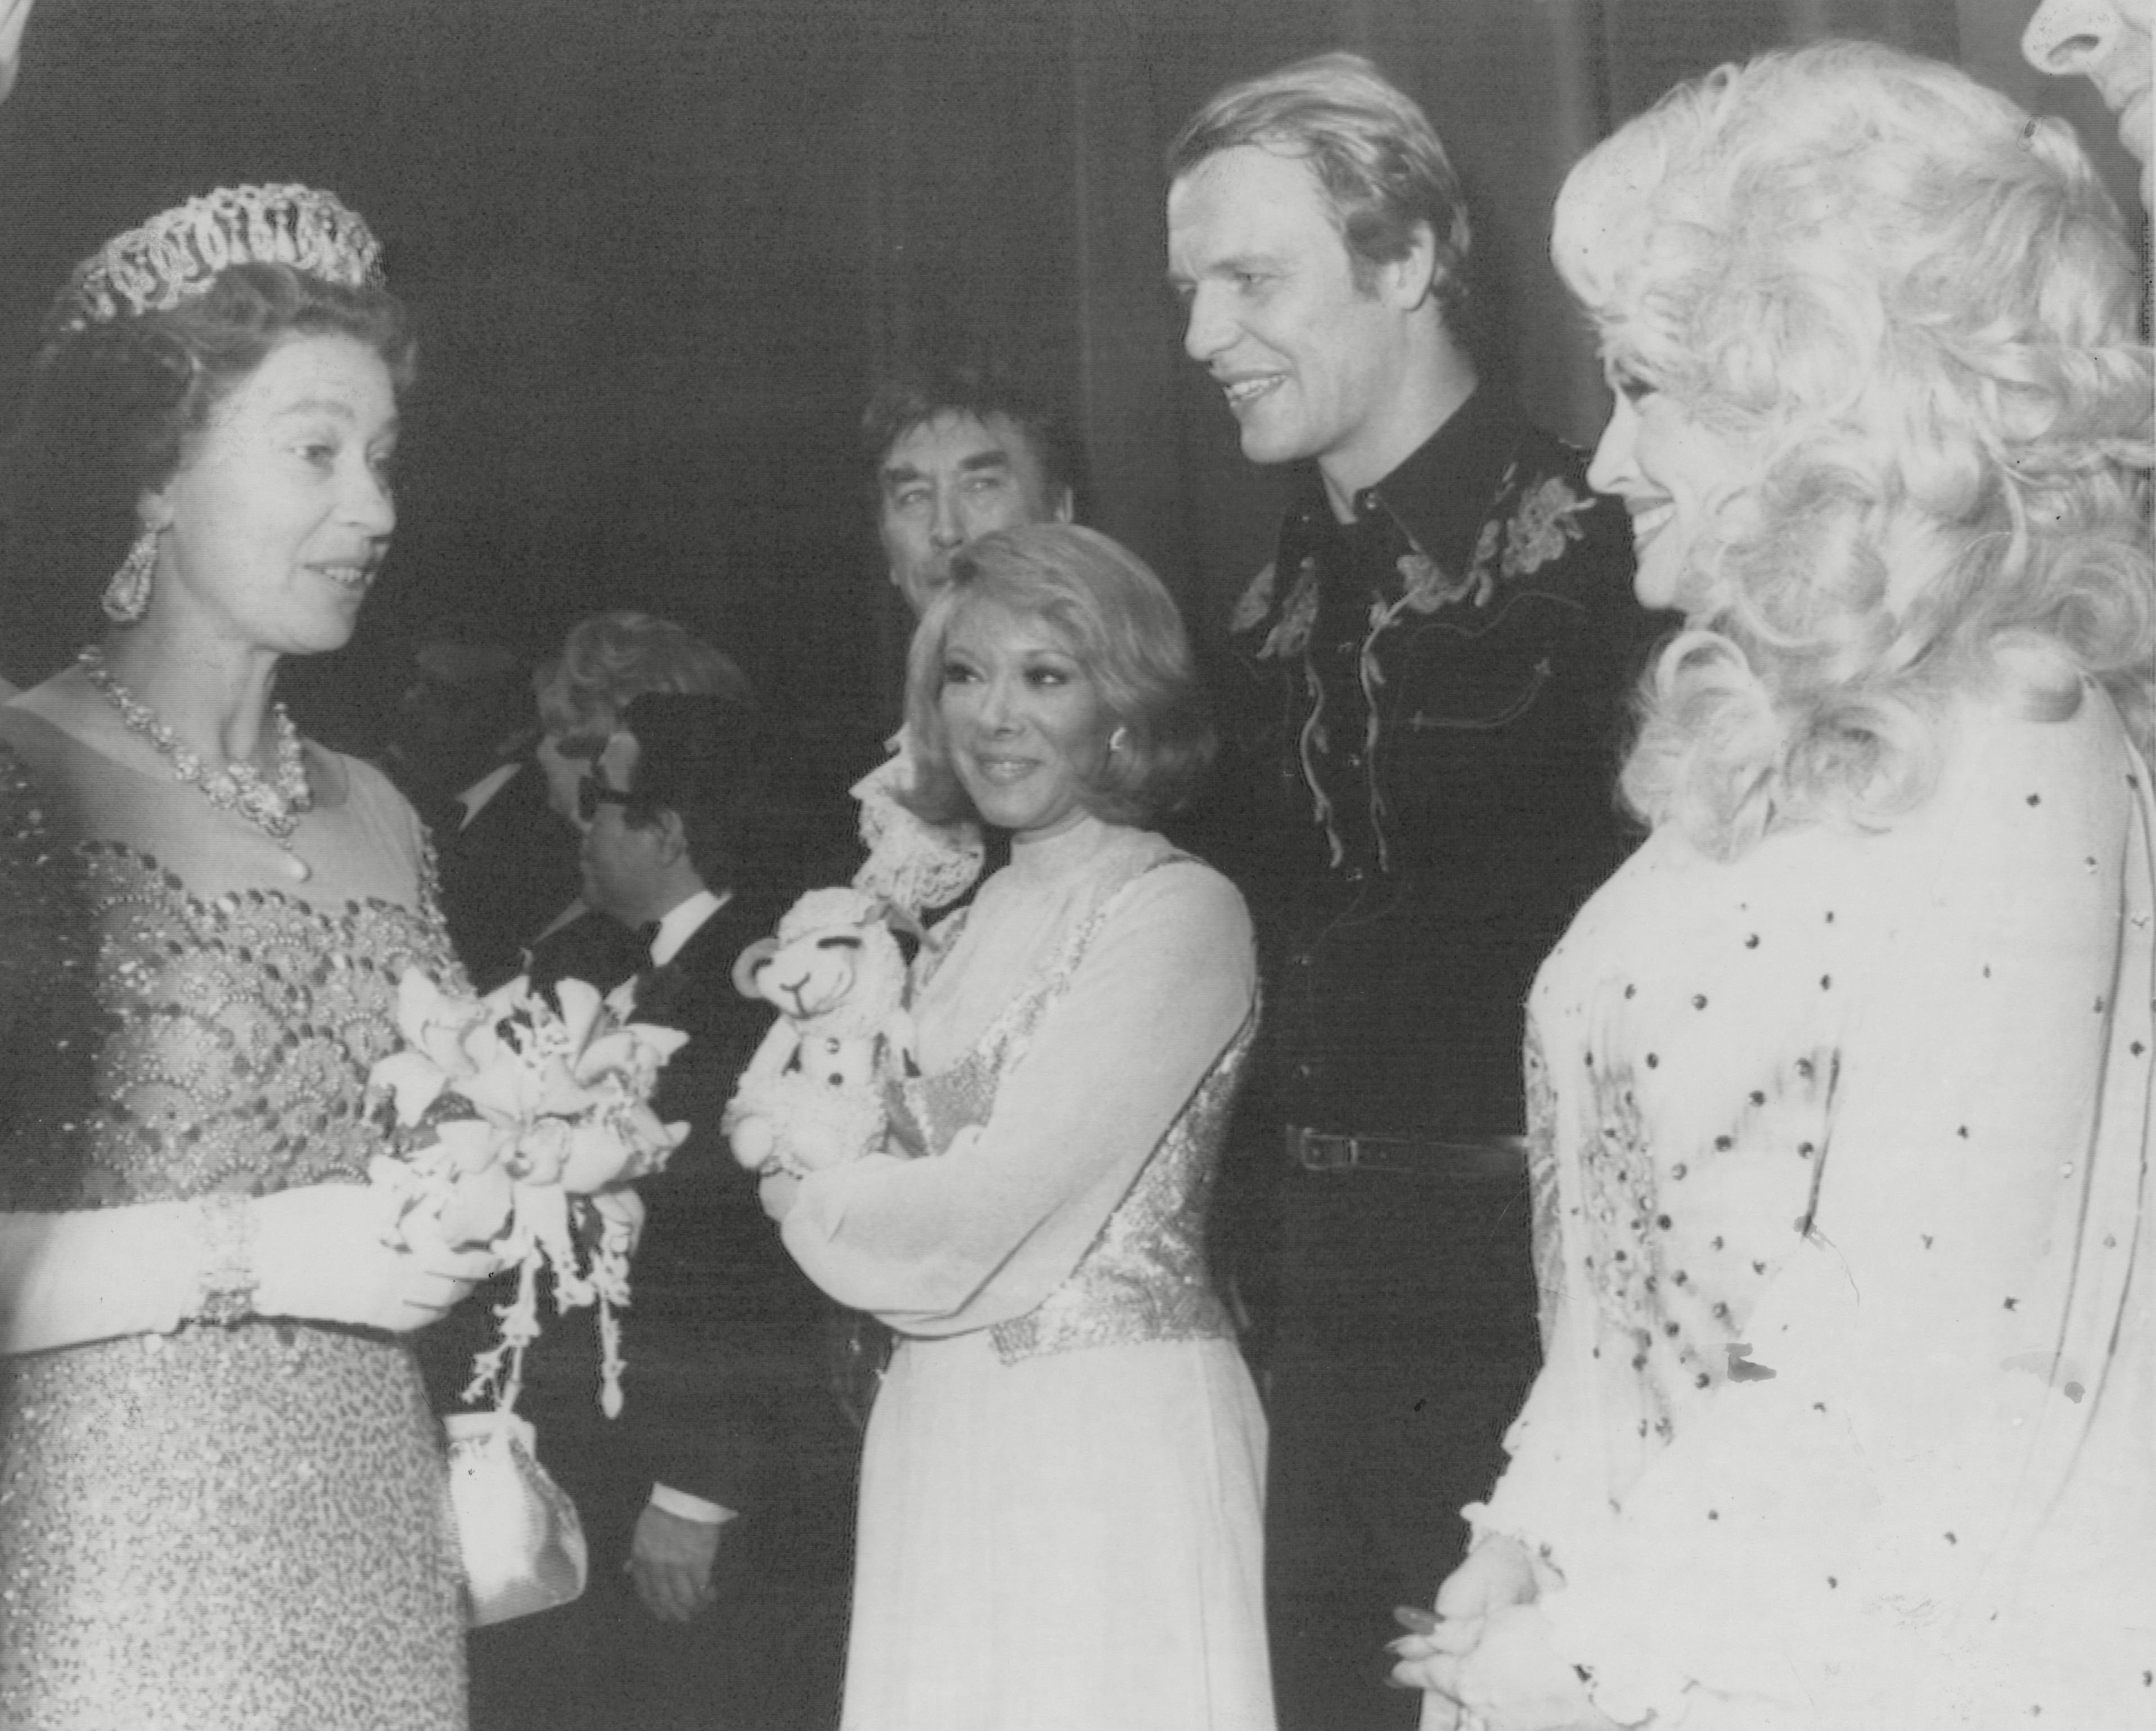 <p>Hollywood celebrities have made the cut in Scotland too: Queen Elizabeth II is seen here greeting "Lamb Chop's Play-Along" star Shari Lewis, "Starsky & Hutch" actor David Soul and country music legend Dolly Parton following a variety show in Glasgow during her Silver Jubilee tour of Scotland on May 17, 1977.</p>